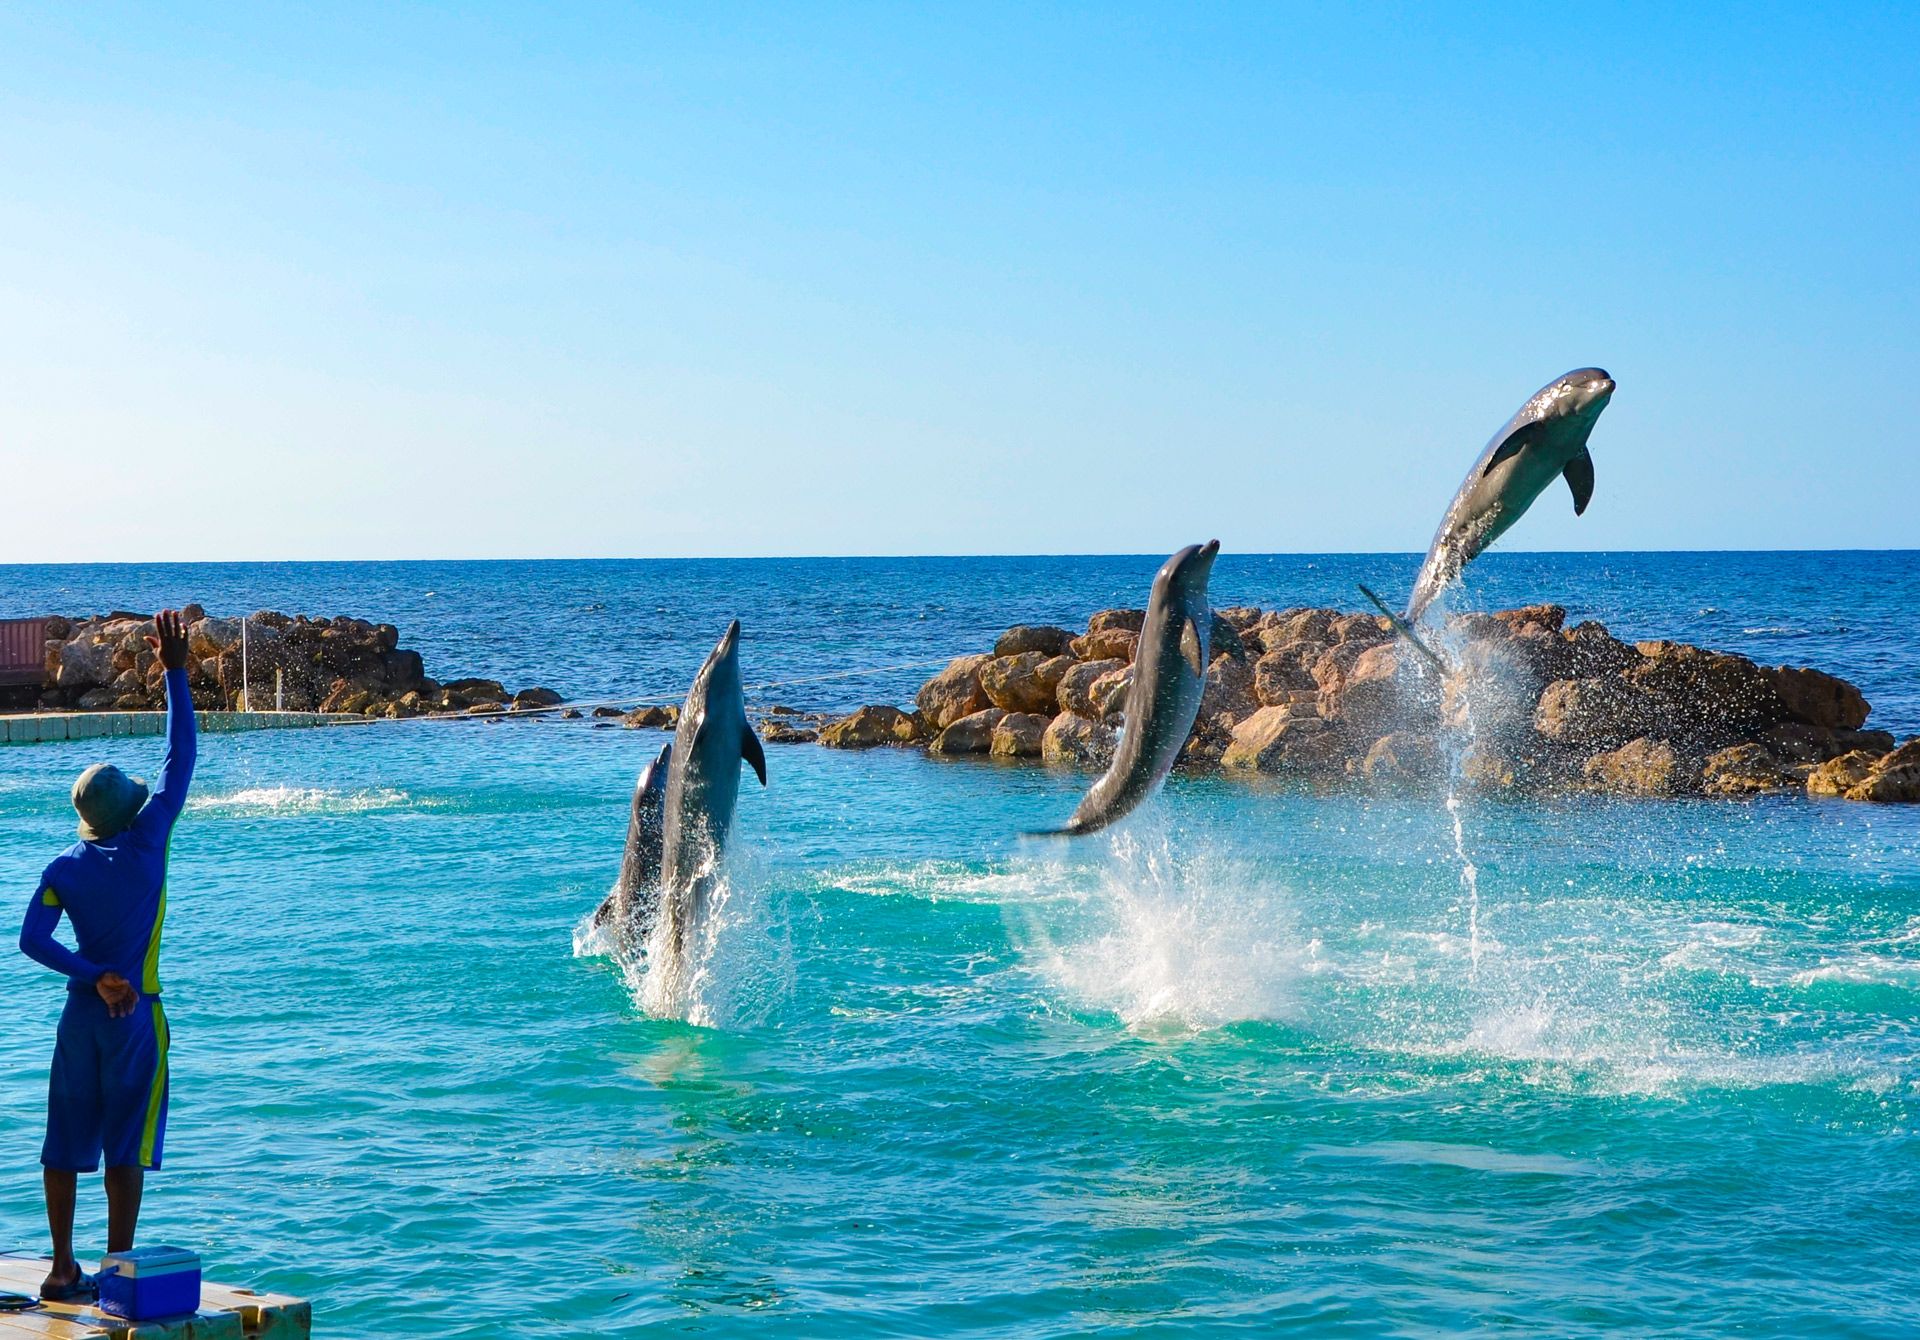 Swim With Dolphins, Stingrays And Sharks At Dolphin Cove